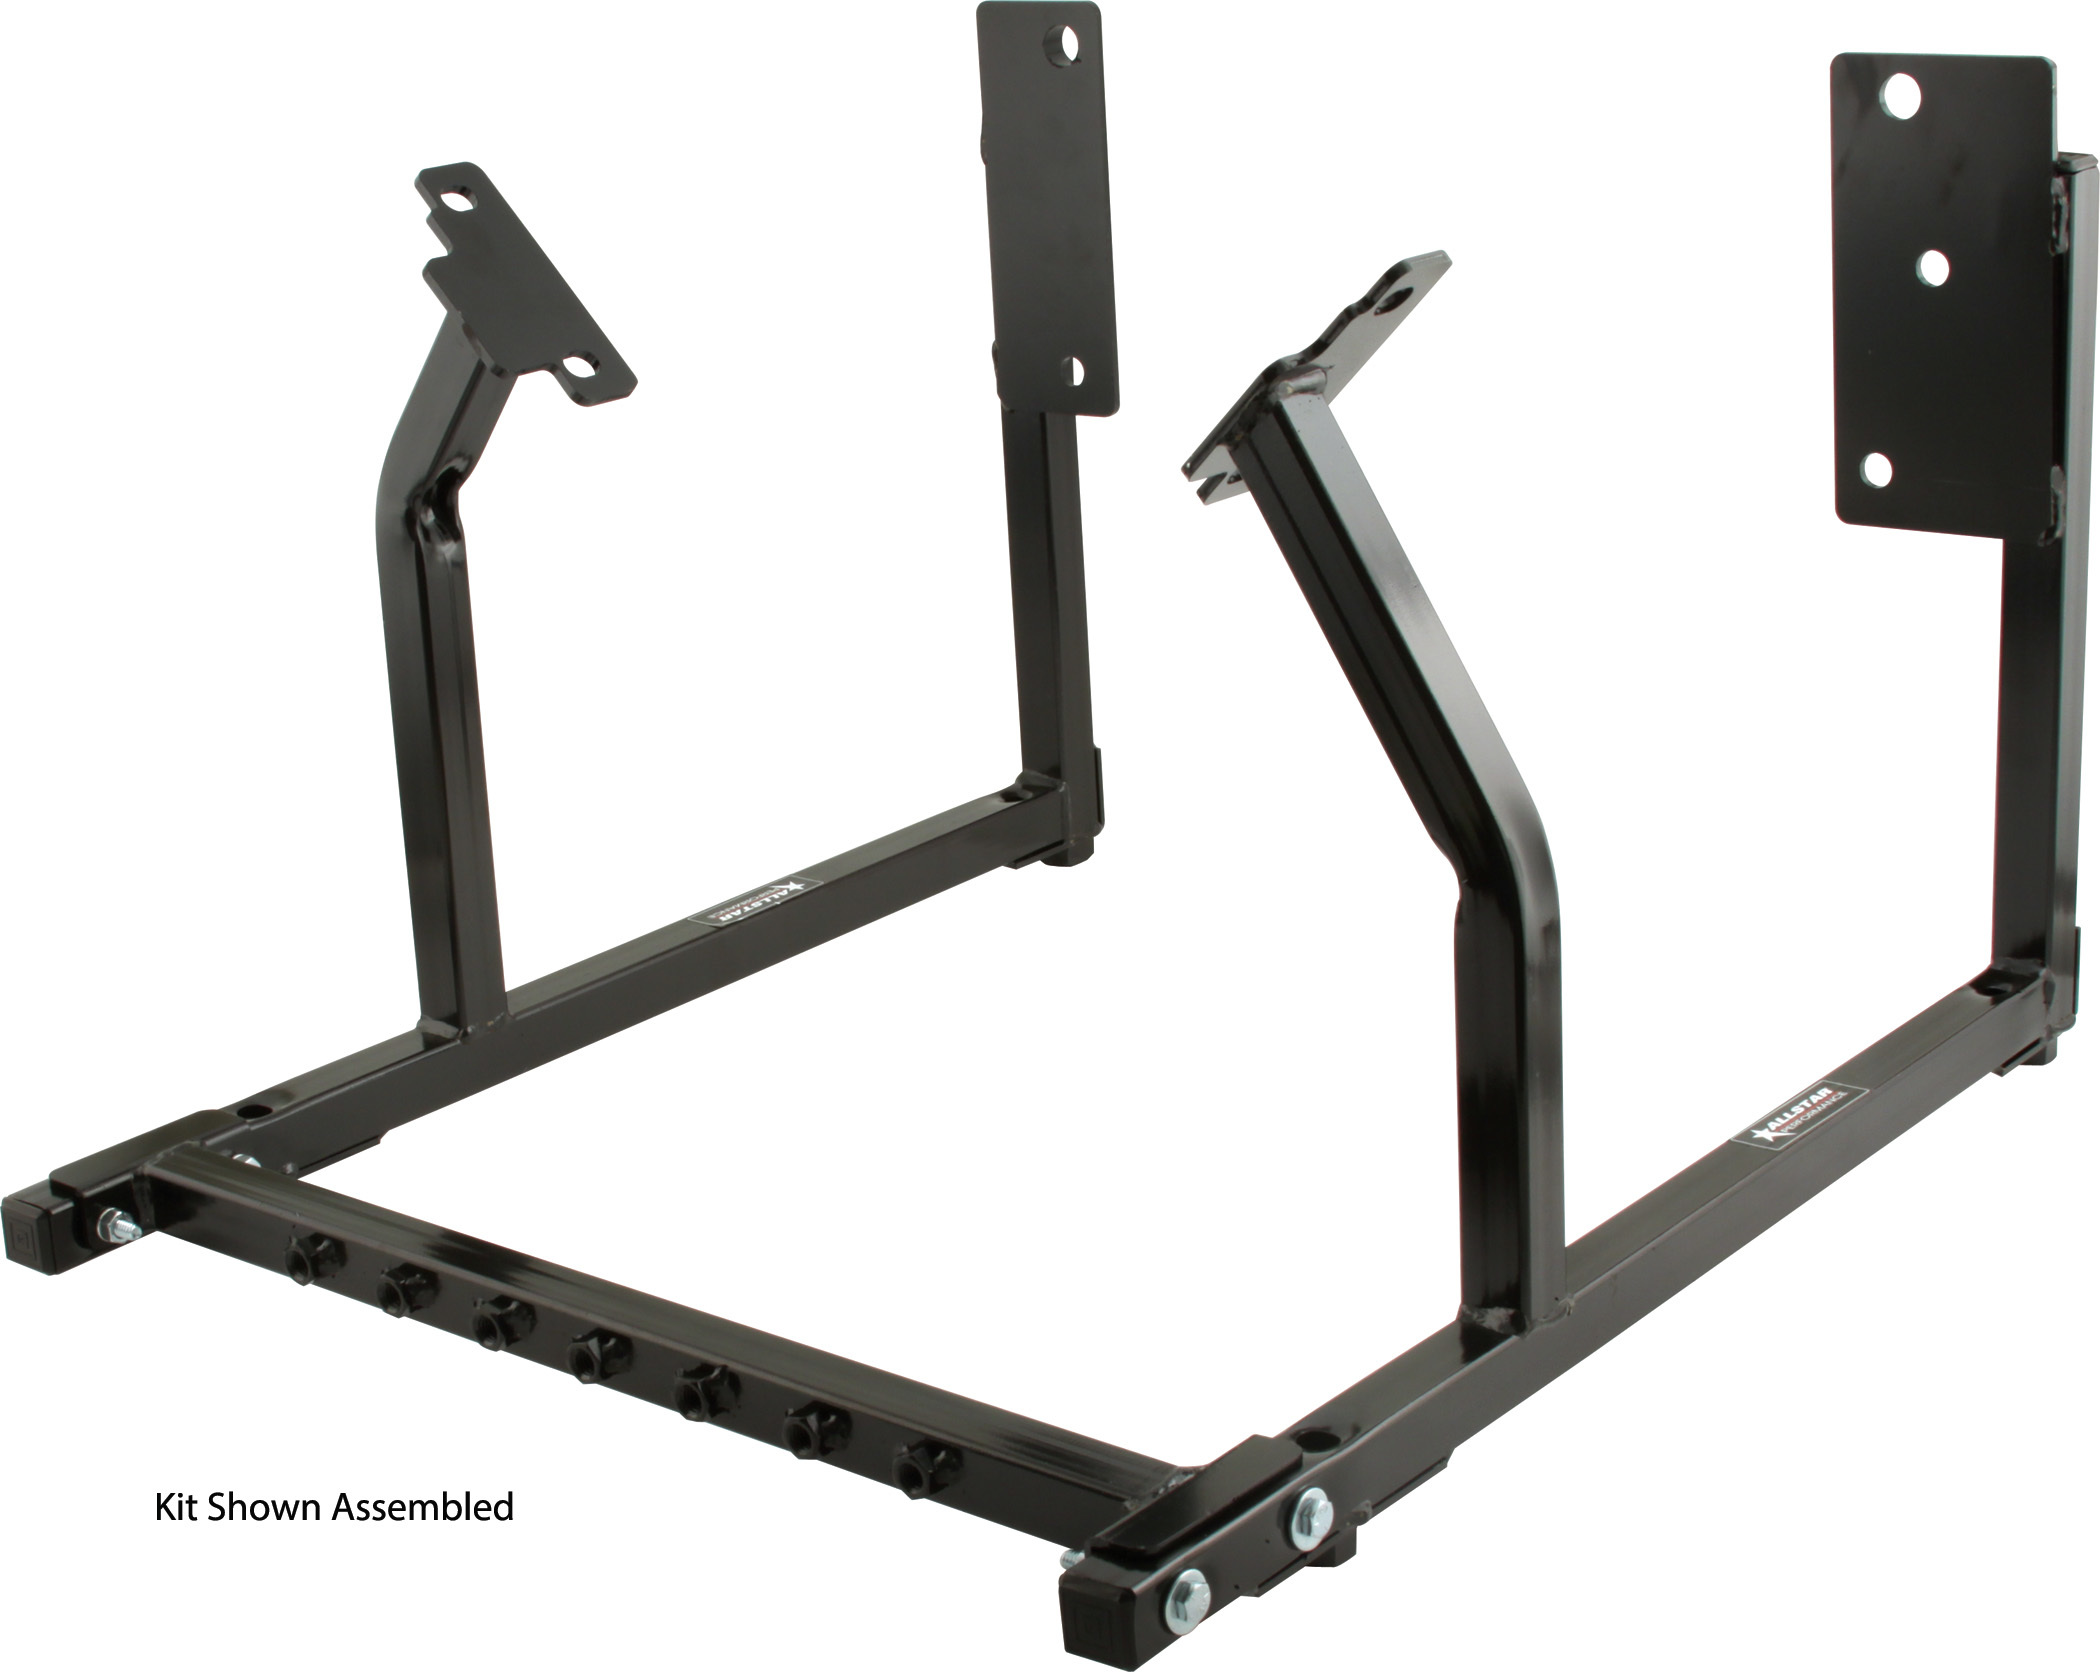 Allstar Performance 10149 Engine Cradle, Heavy Duty, 1 in Square Tube, Hardware Included, Steel, Black Powder Coat, Ford Modular, Each